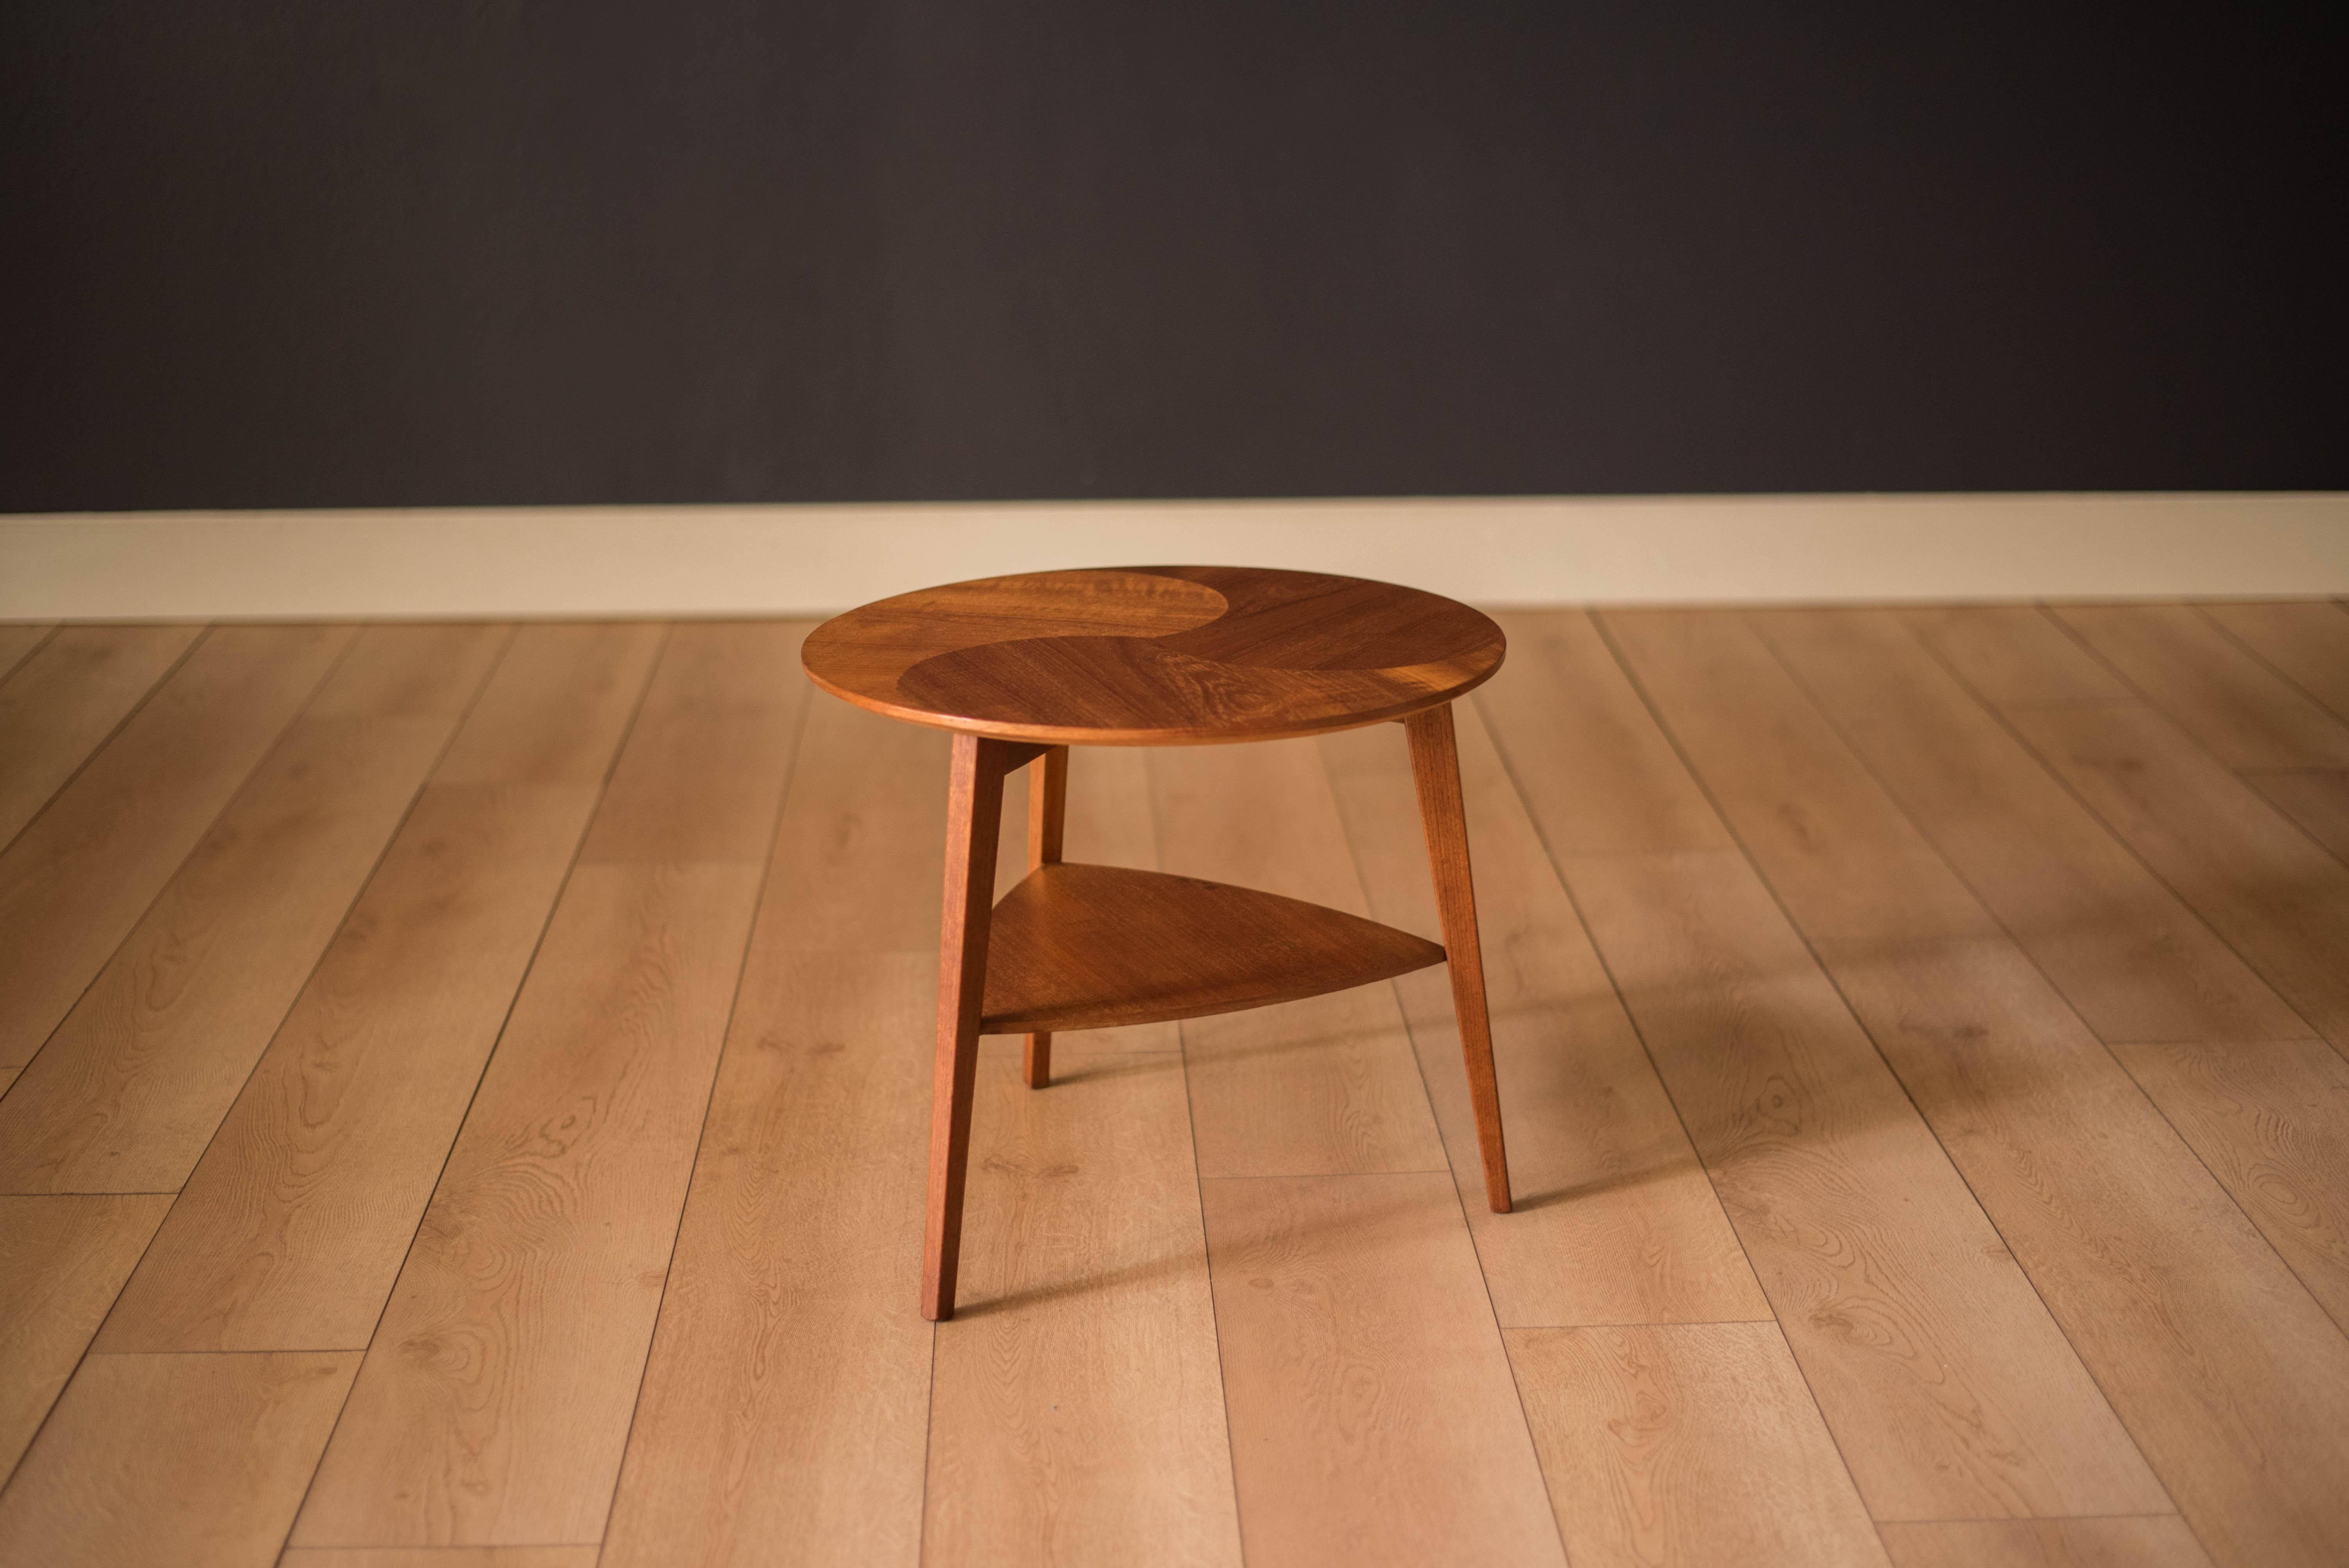 Mid-Century Modern round occasional side table manufactured by Mobelintarsia, Denmark. This two-tier piece features a contrasting teak round top with a lower triangular shelf.